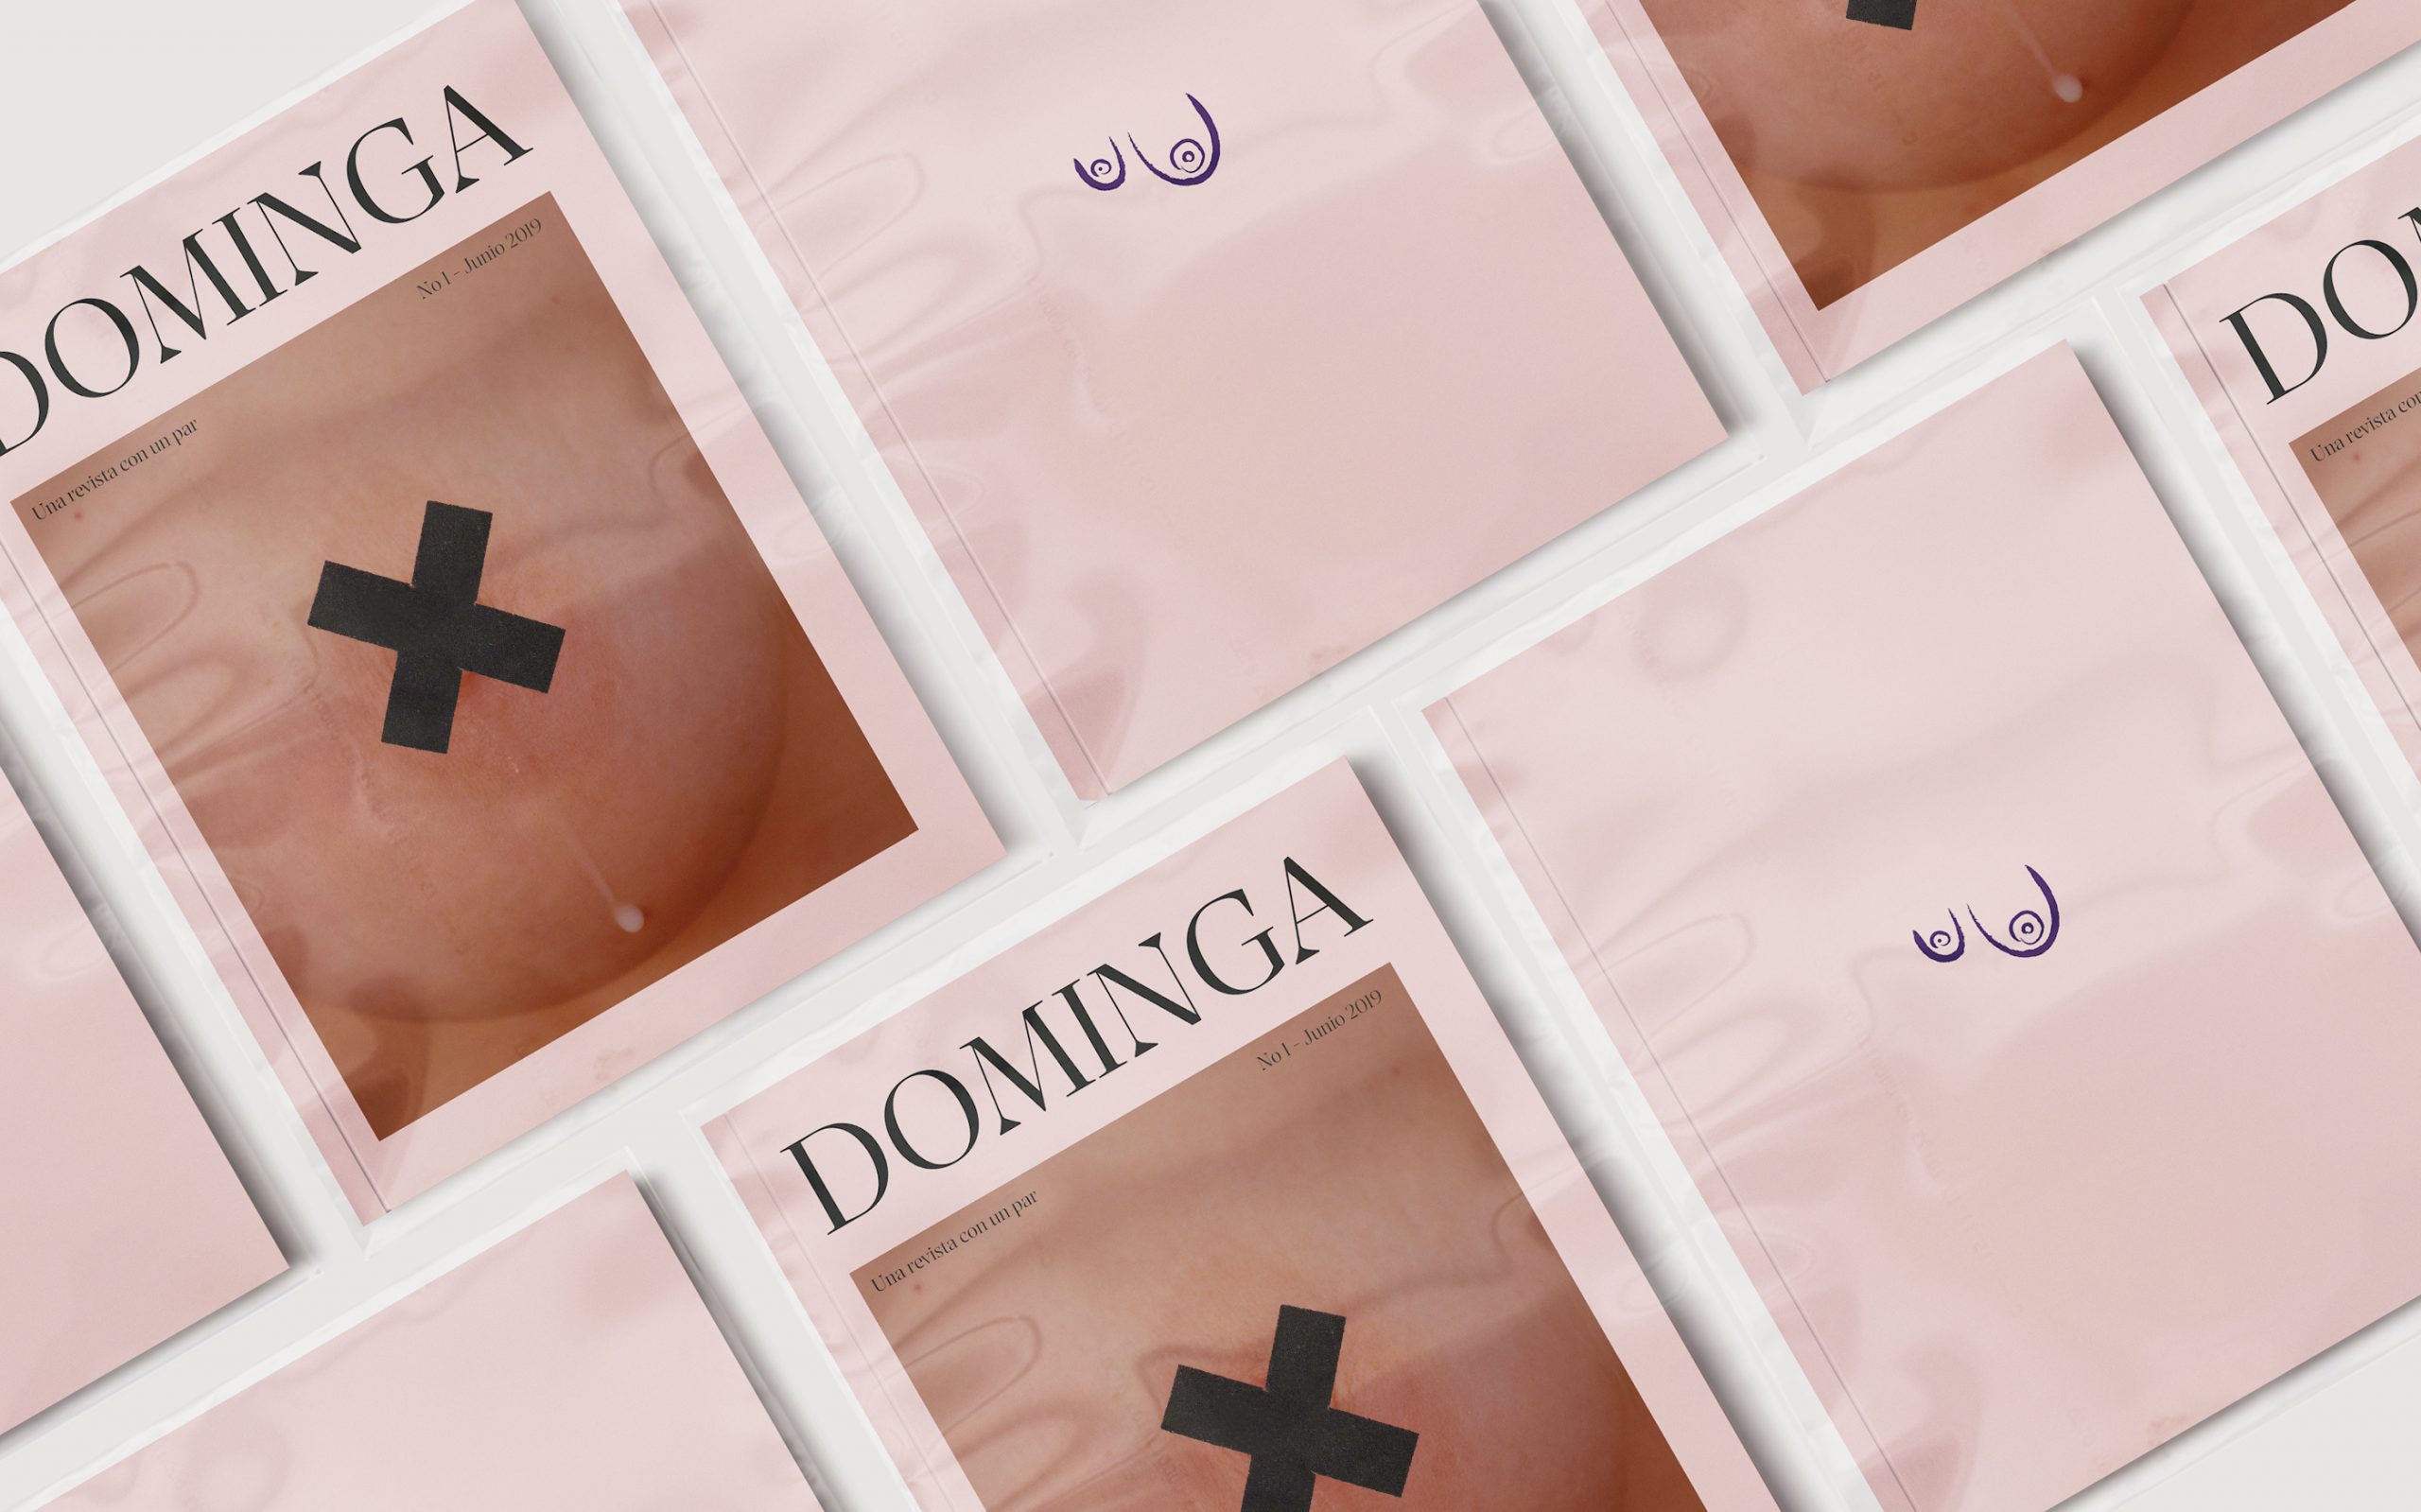 Modern day feminist magazine created by a team of female graphic designer